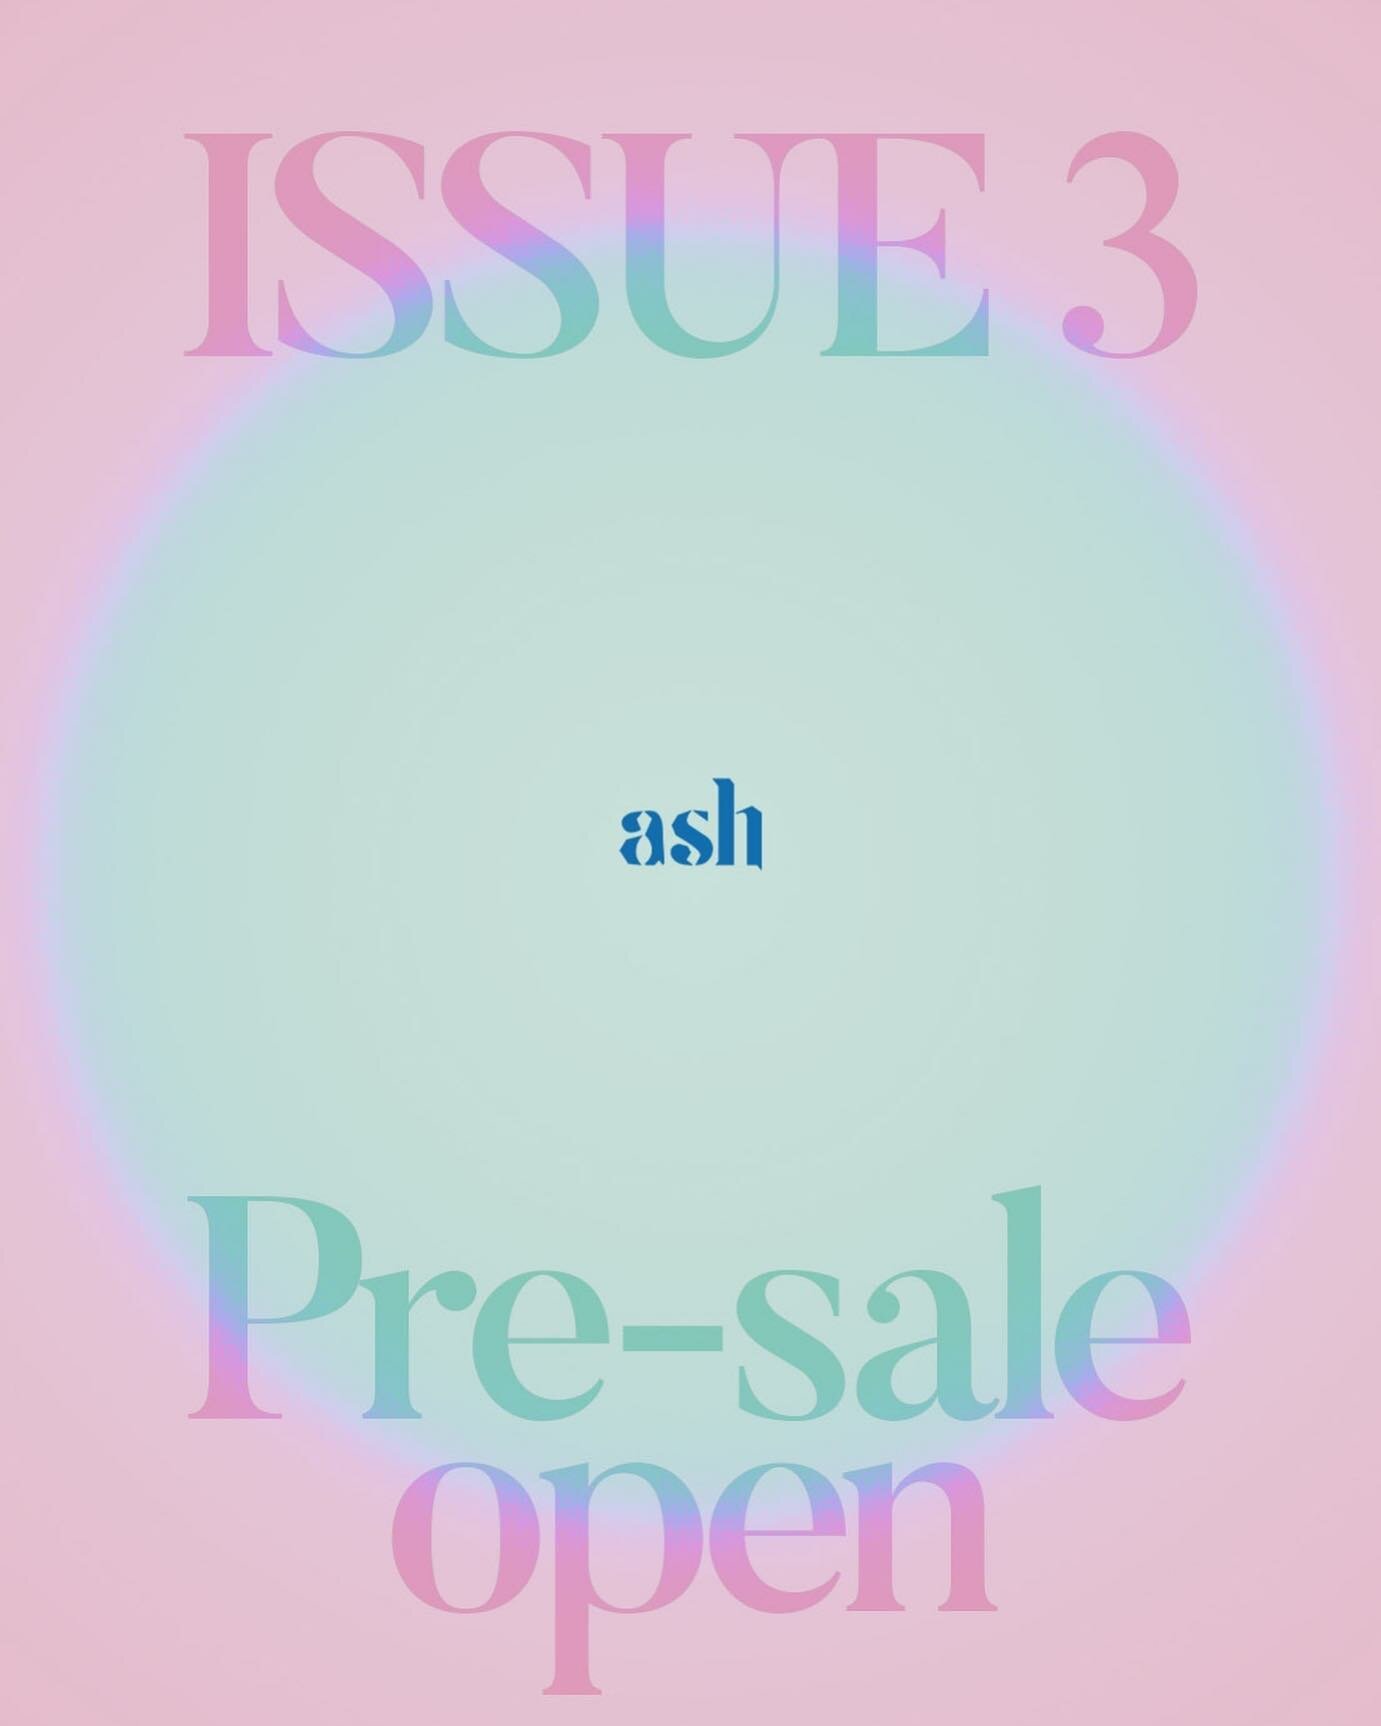 🚨 ISSUE 3 PRE-SALE IS NOW OPEN!!! 🚨⠀
⠀
As male, cis-het voices continue to dominate the news and cultural media, Ash is a space reserved for those of us who do not enjoy equal representation. As always, we're ad-free, independent and fiercely inter